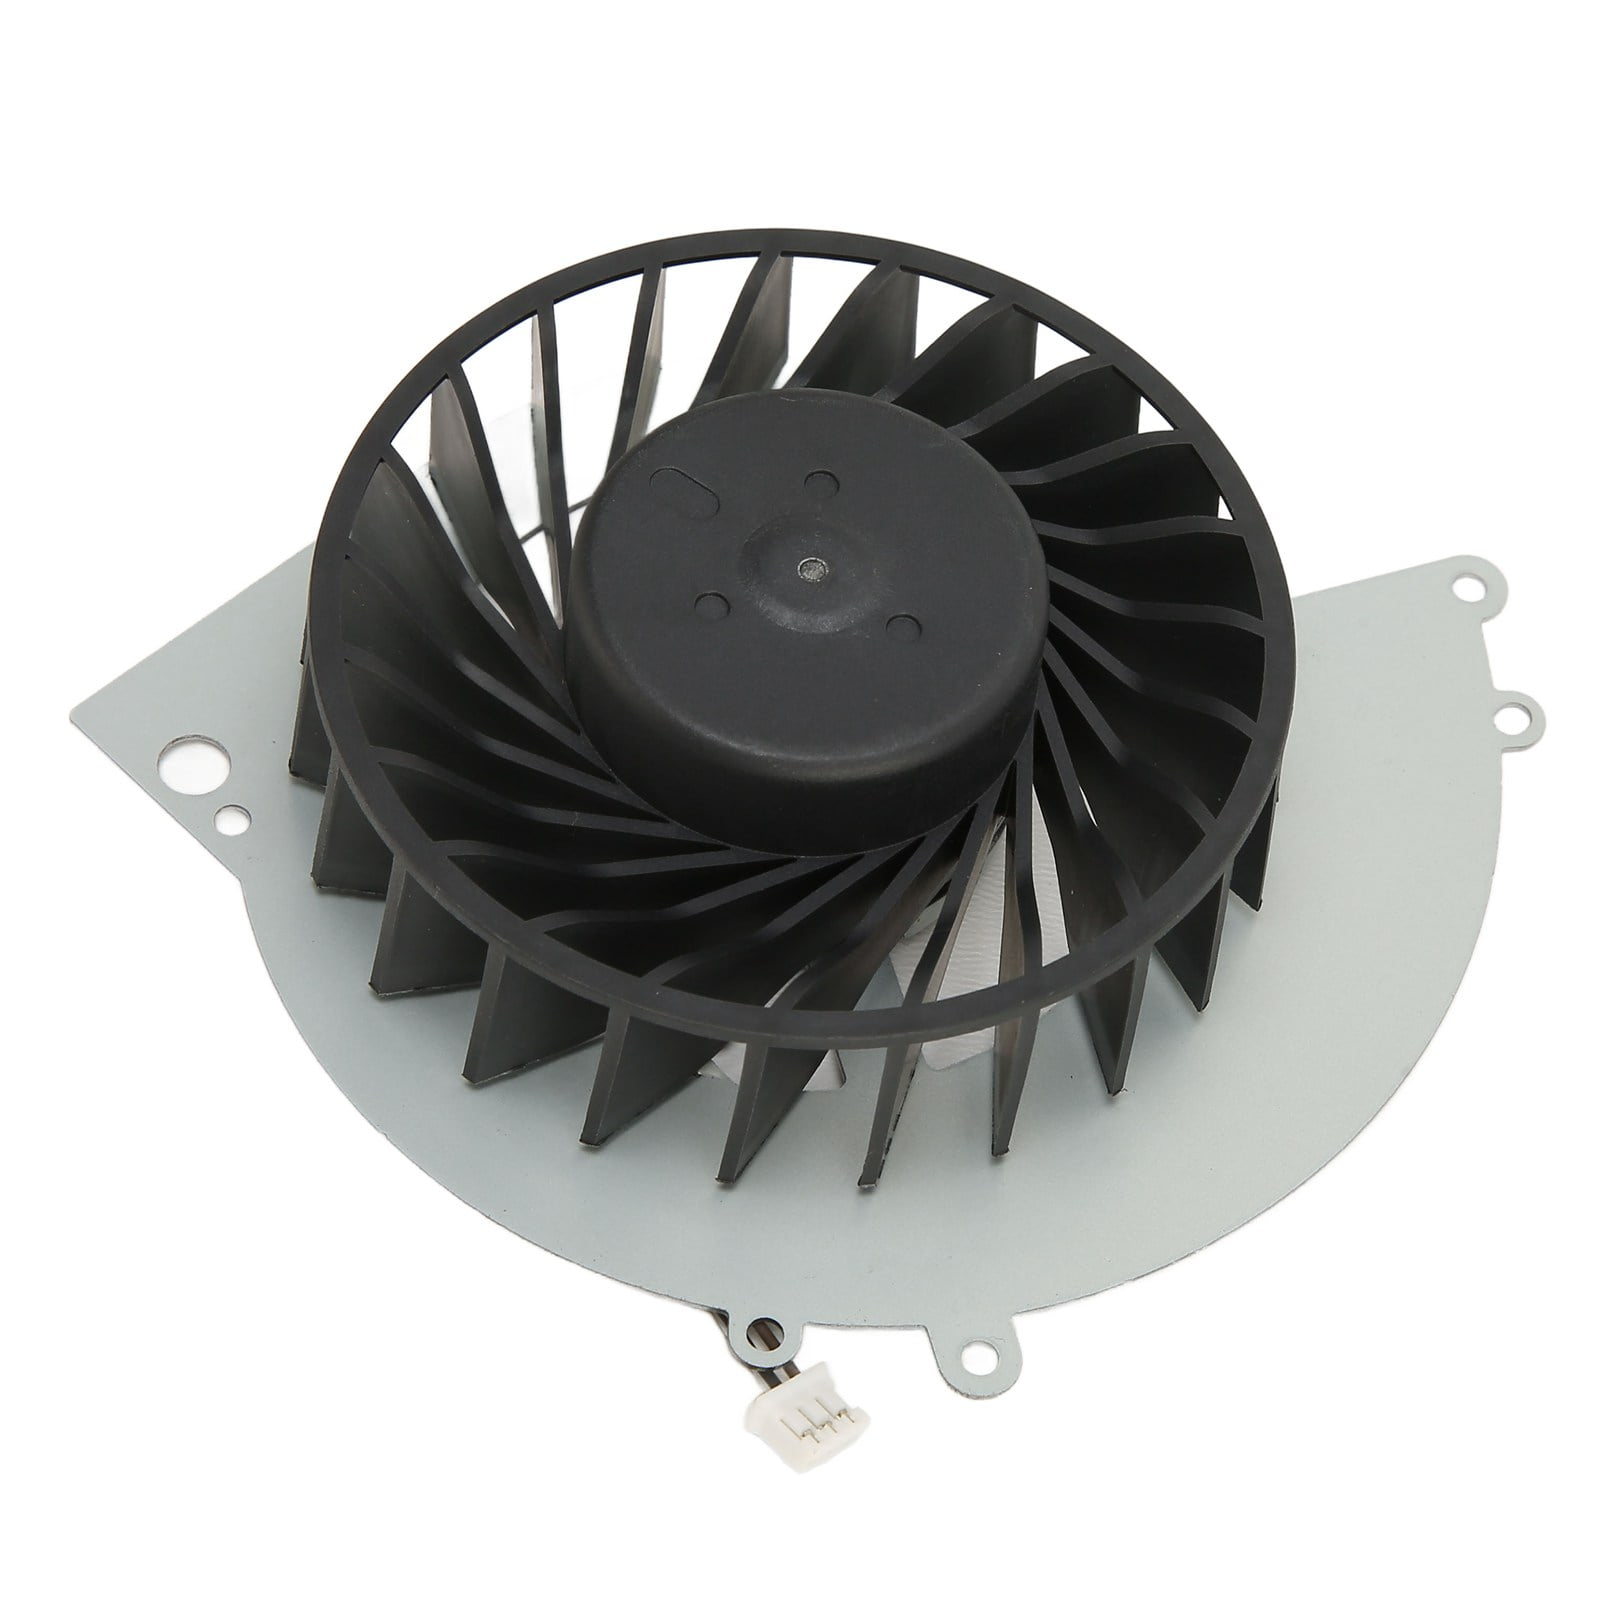 Replacement Cooling Fan, Internal Cooling Fan 1.4A DC 12V For CUH